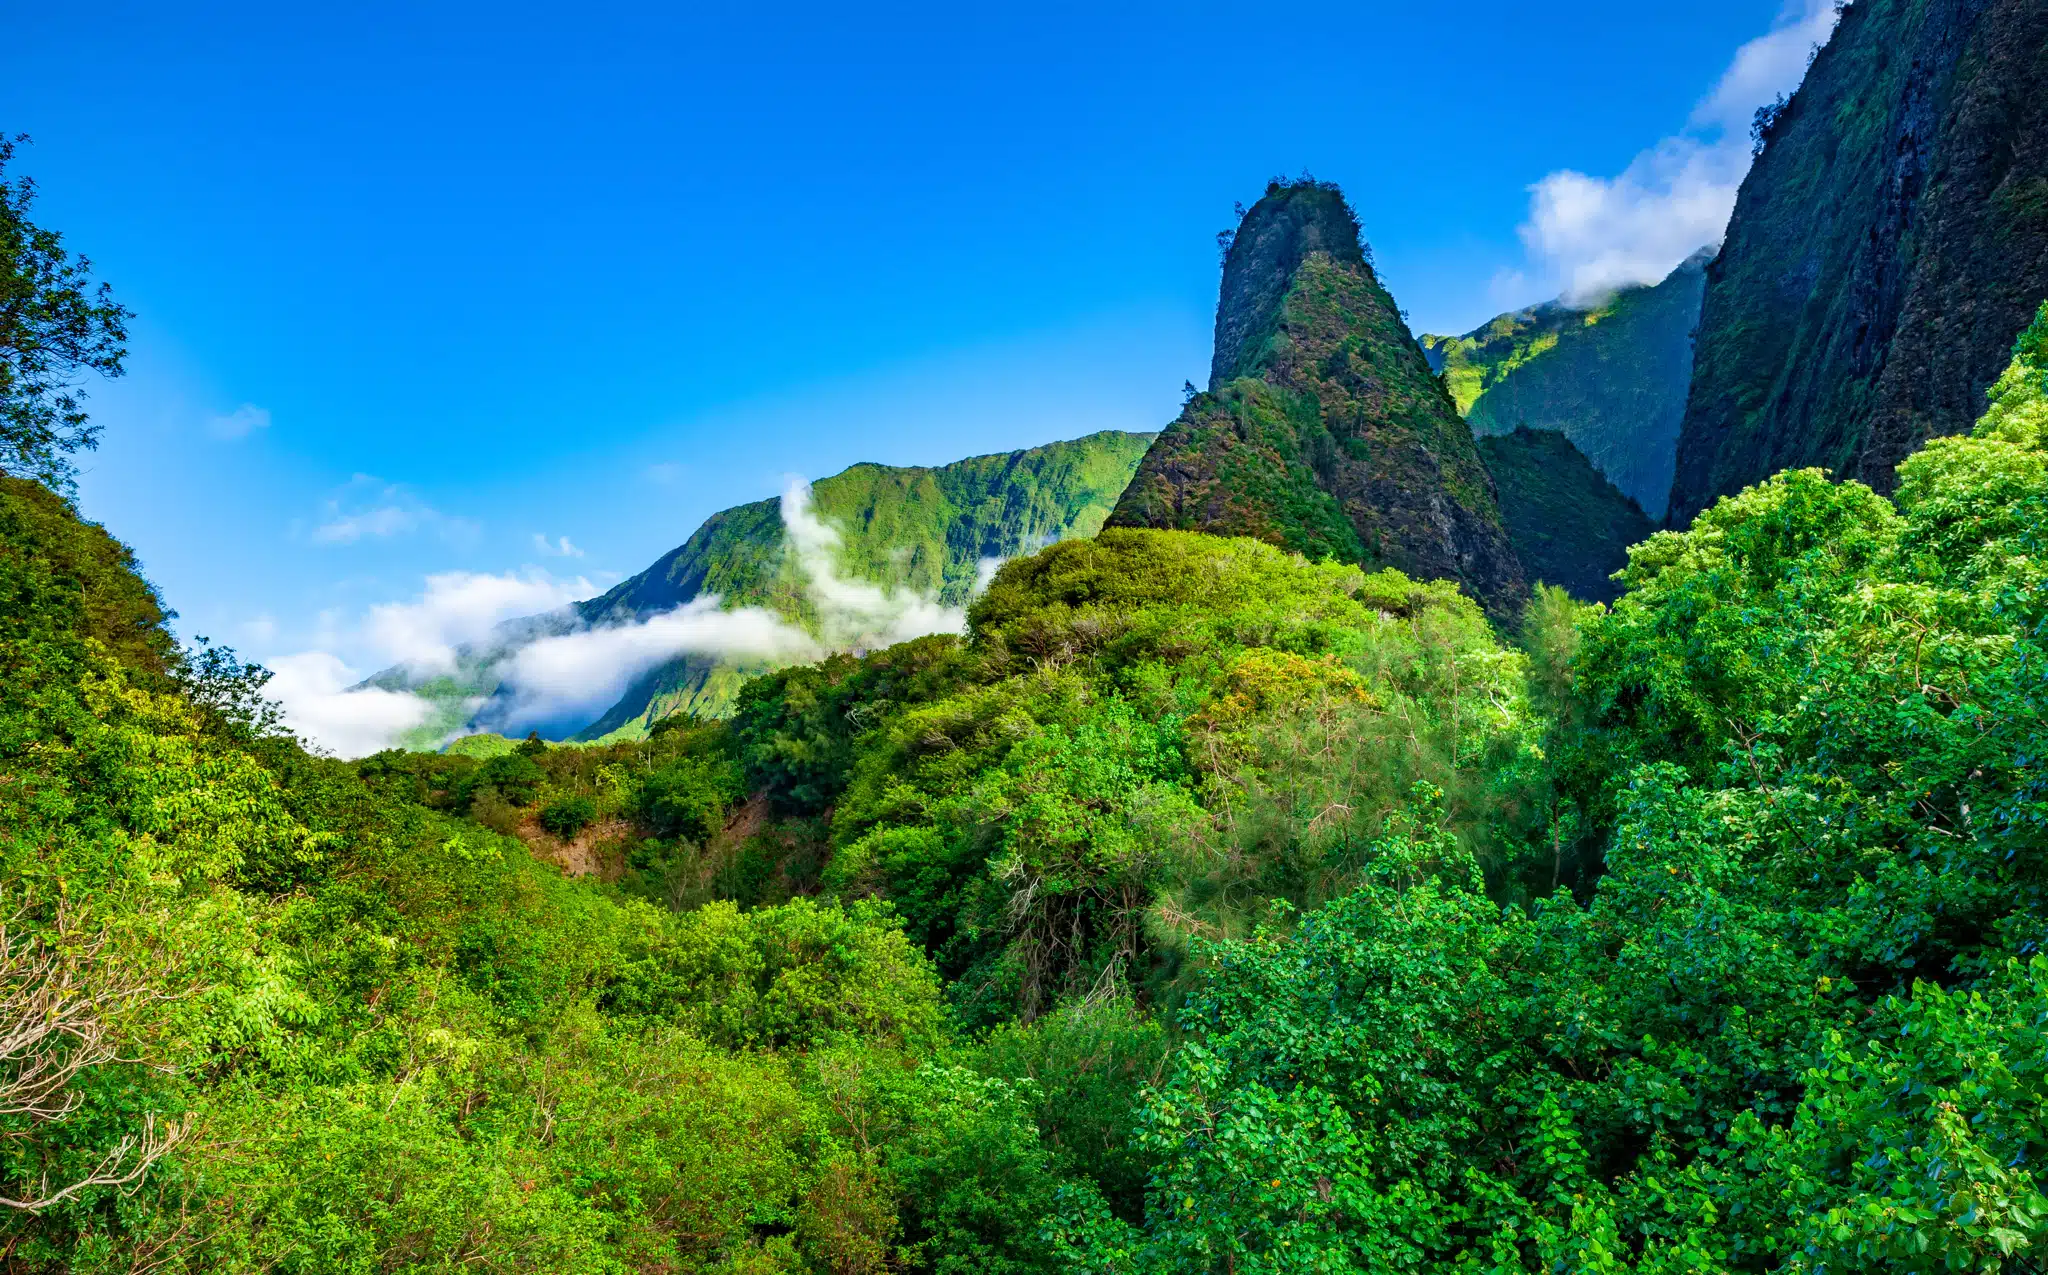 Iao Valley State Park Trail is a Hiking Trail located in the city of Wailuku on Maui, Hawaii